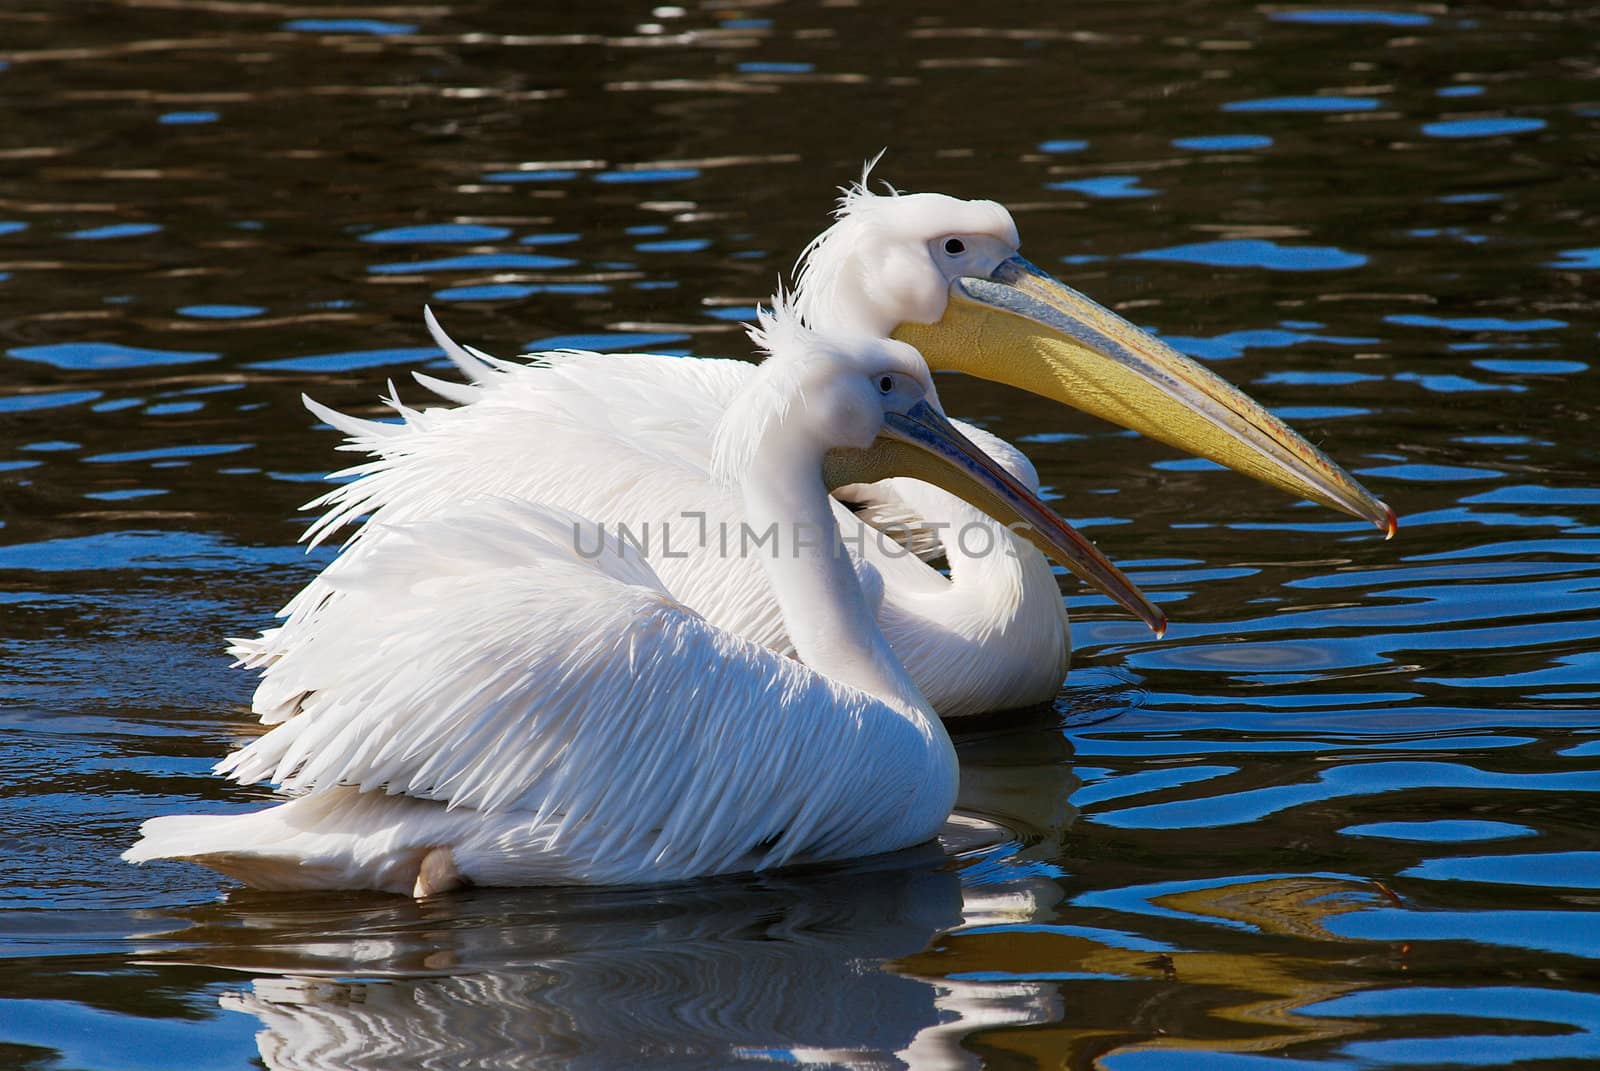 Two white pelicans float in a pond